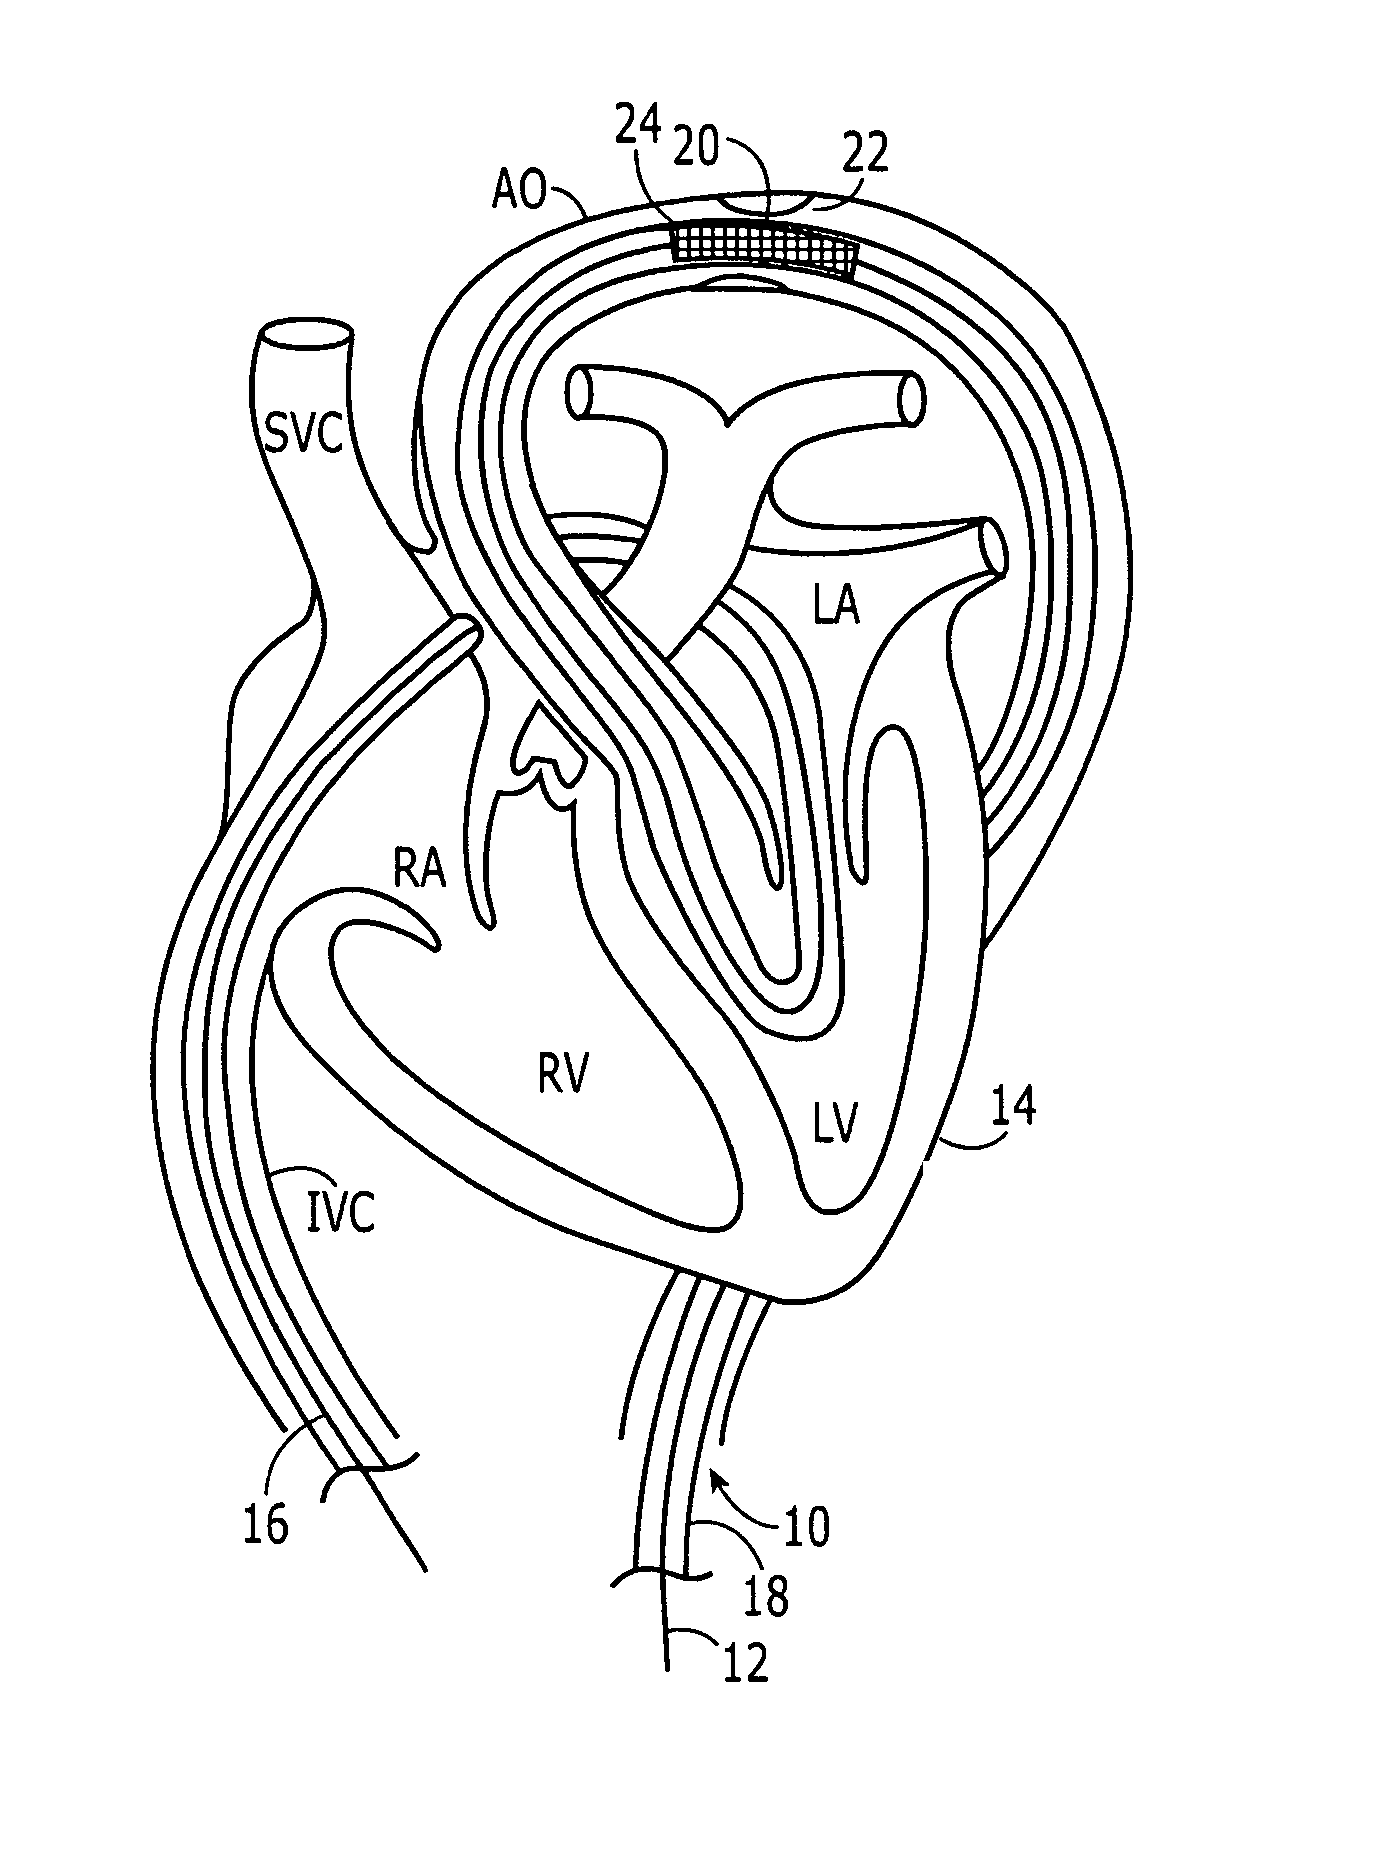 Separable sheath and method for insertion of a medical device into a bodily vessel using a separable sheath